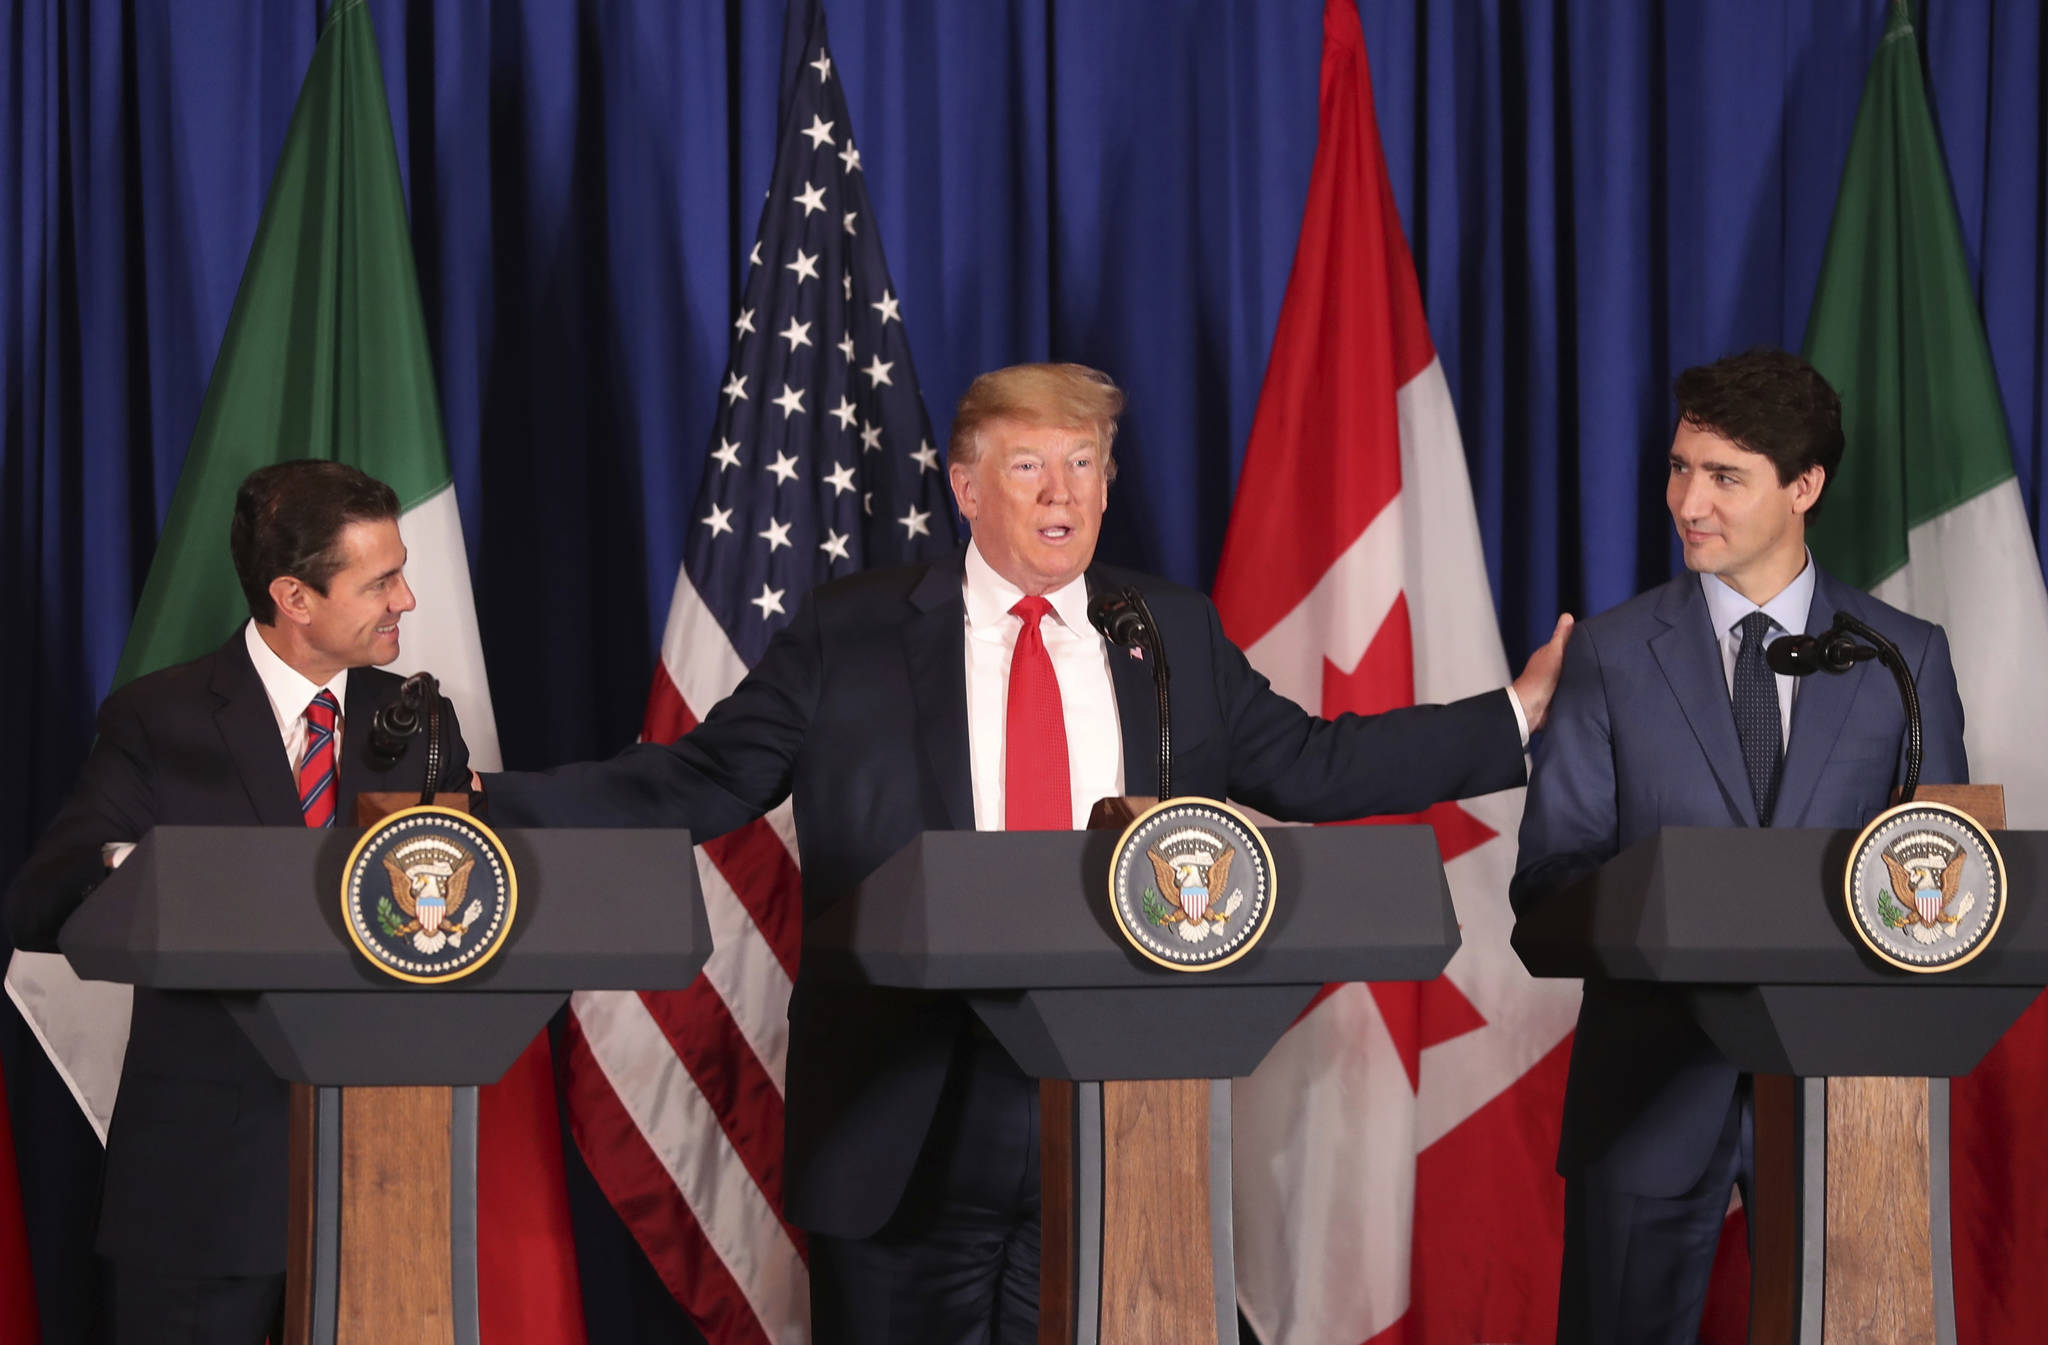 President Donald Trump, center, reaches out to Mexico’s President Enrique Pena Nieto, left, and Canada’s Prime Minister Justin Trudeau as they prepare to sign a new United States-Mexico-Canada Agreement that is replacing the NAFTA trade deal, during a ceremony at a hotel before the start of the G20 summit in Buenos Aires, Argentina, Friday, Nov. 30, 2018. The USMCA, as Trump refers to it, must still be approved by lawmakers in all three countries. (AP Photo/Martin Mejia)